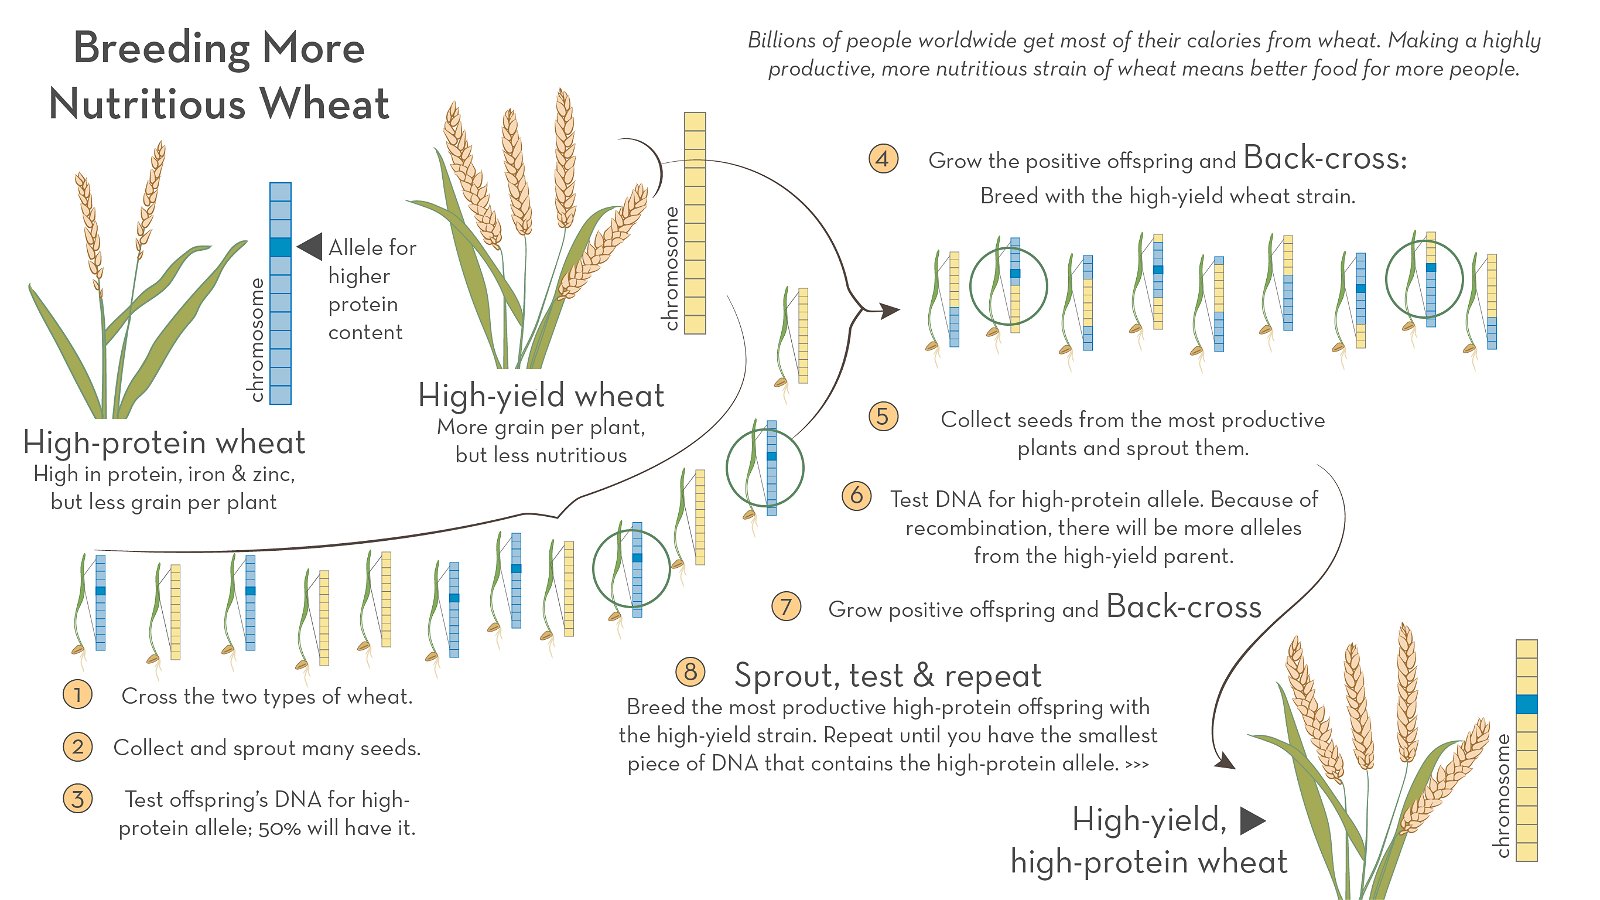 info graphic showing the breeding of more nutritious wheat